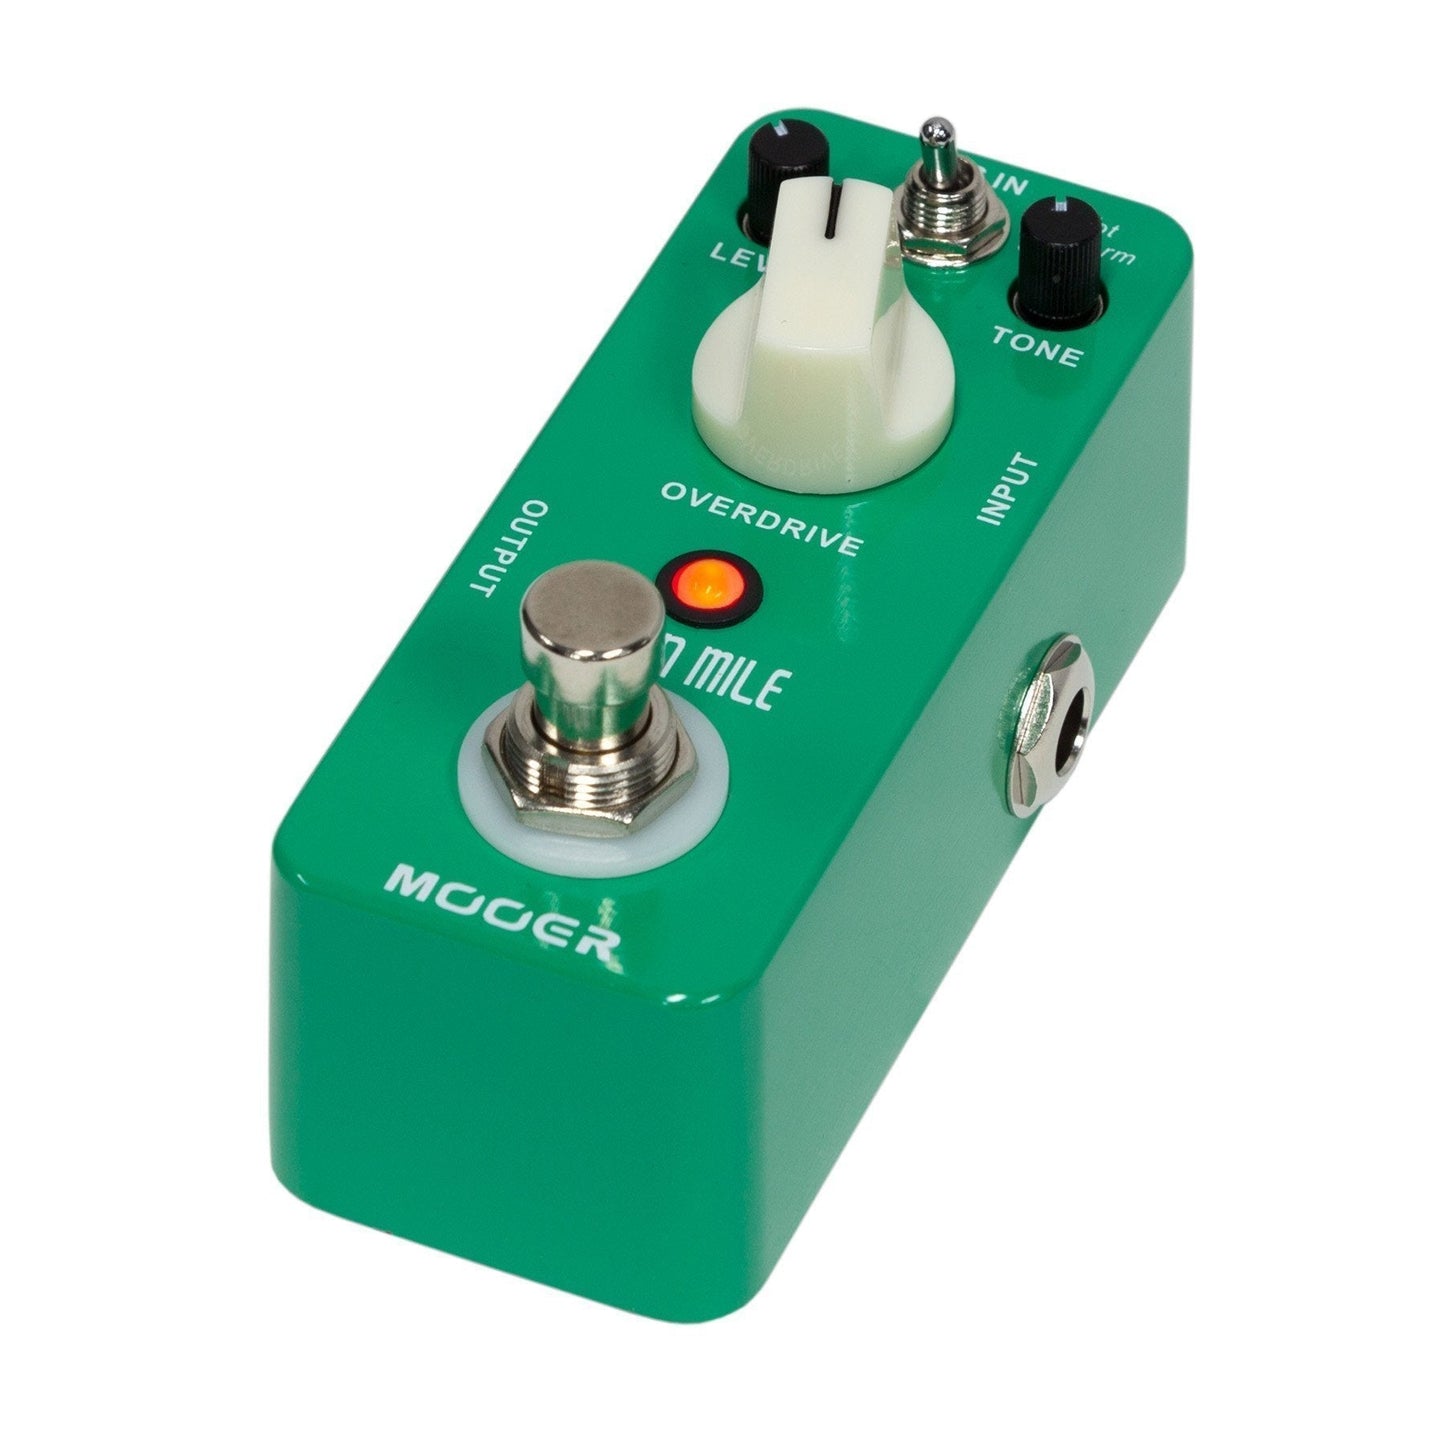 Mooer 'Green Mile' Dual Overdrive Micro Guitar Effects Pedal